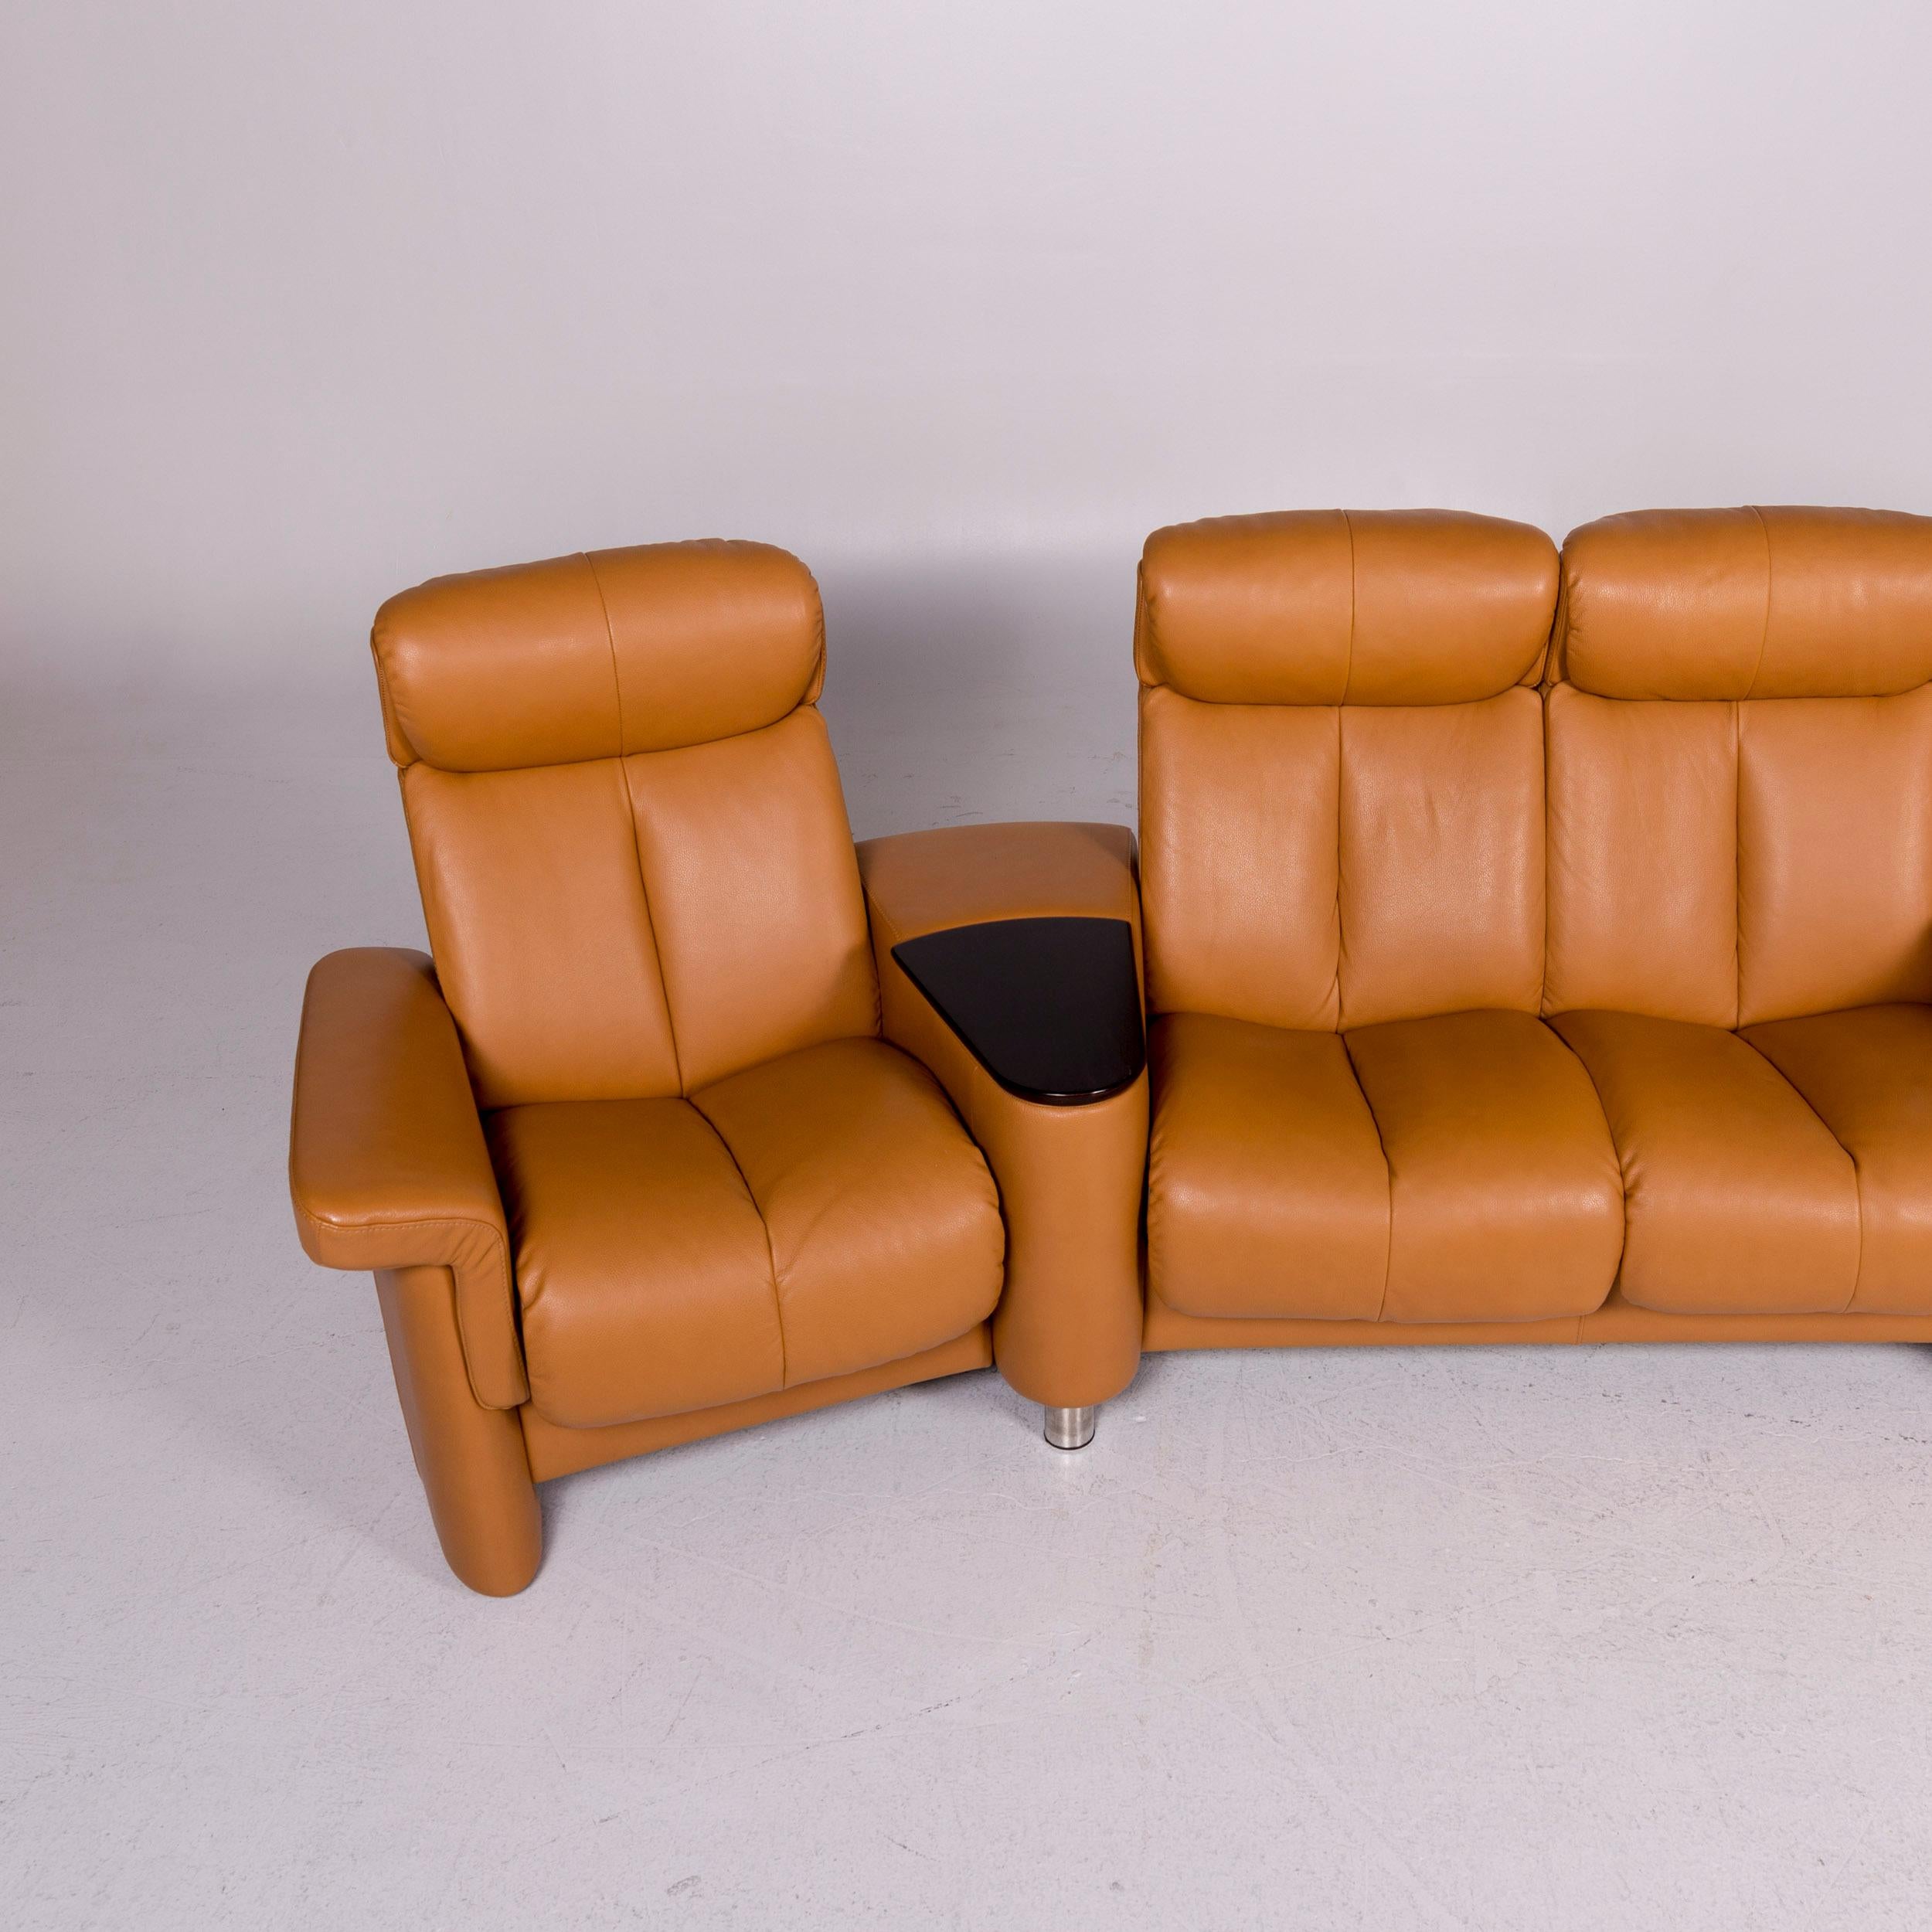 Stressless Legend Leather Corner Sofa Mustard Yellow Ocher Sofa Four-Seater In Excellent Condition For Sale In Cologne, DE